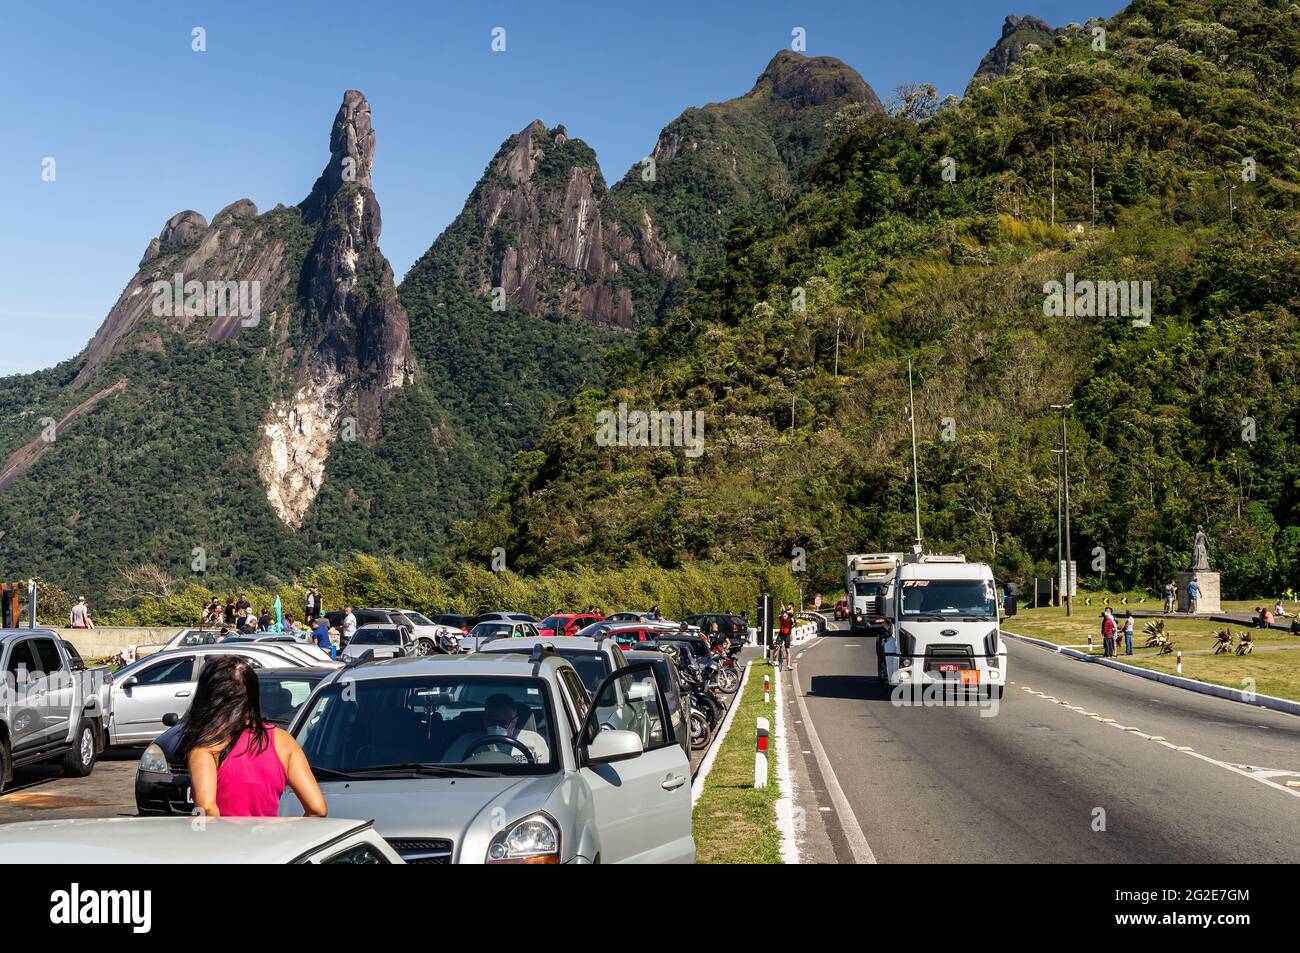 Partial view of Soberbo viewing spot rest area with traffic passing at Rio-Teresopolis highway cloverleaf interchange with Organ Range peaks at back Stock Photo